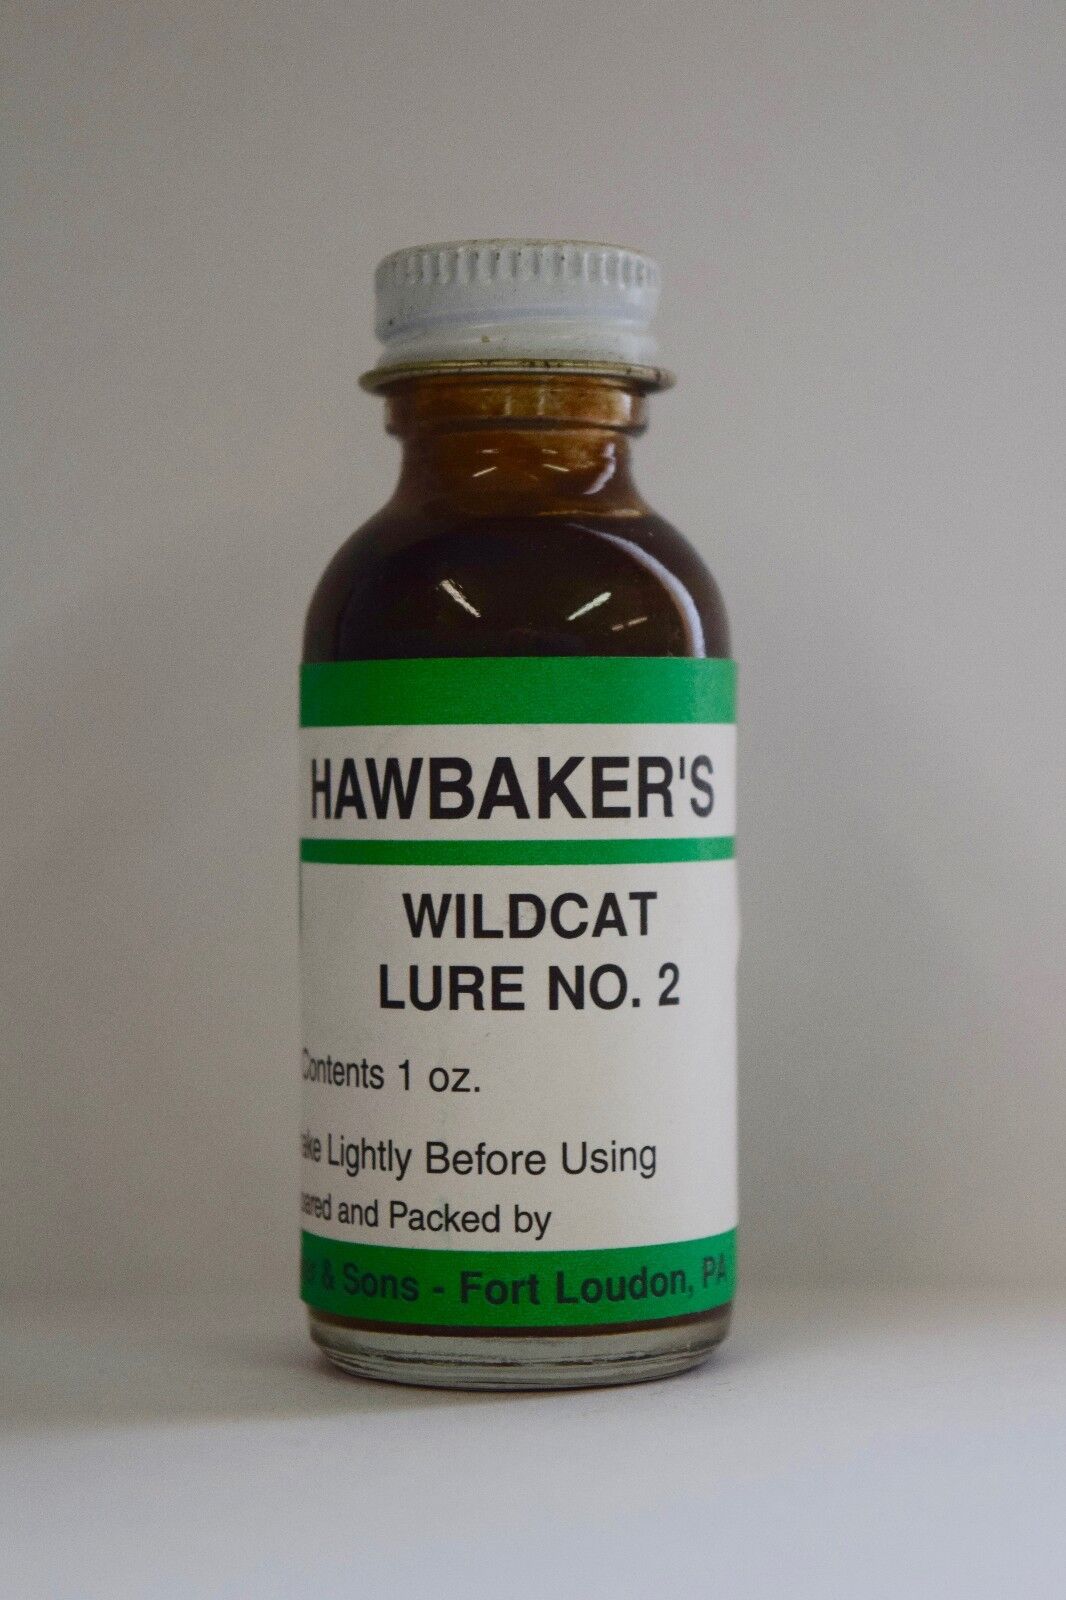 Hawbaker's  "Wildcat Lure No. 2"  1 Oz. Lure Traps  Trapping Bait